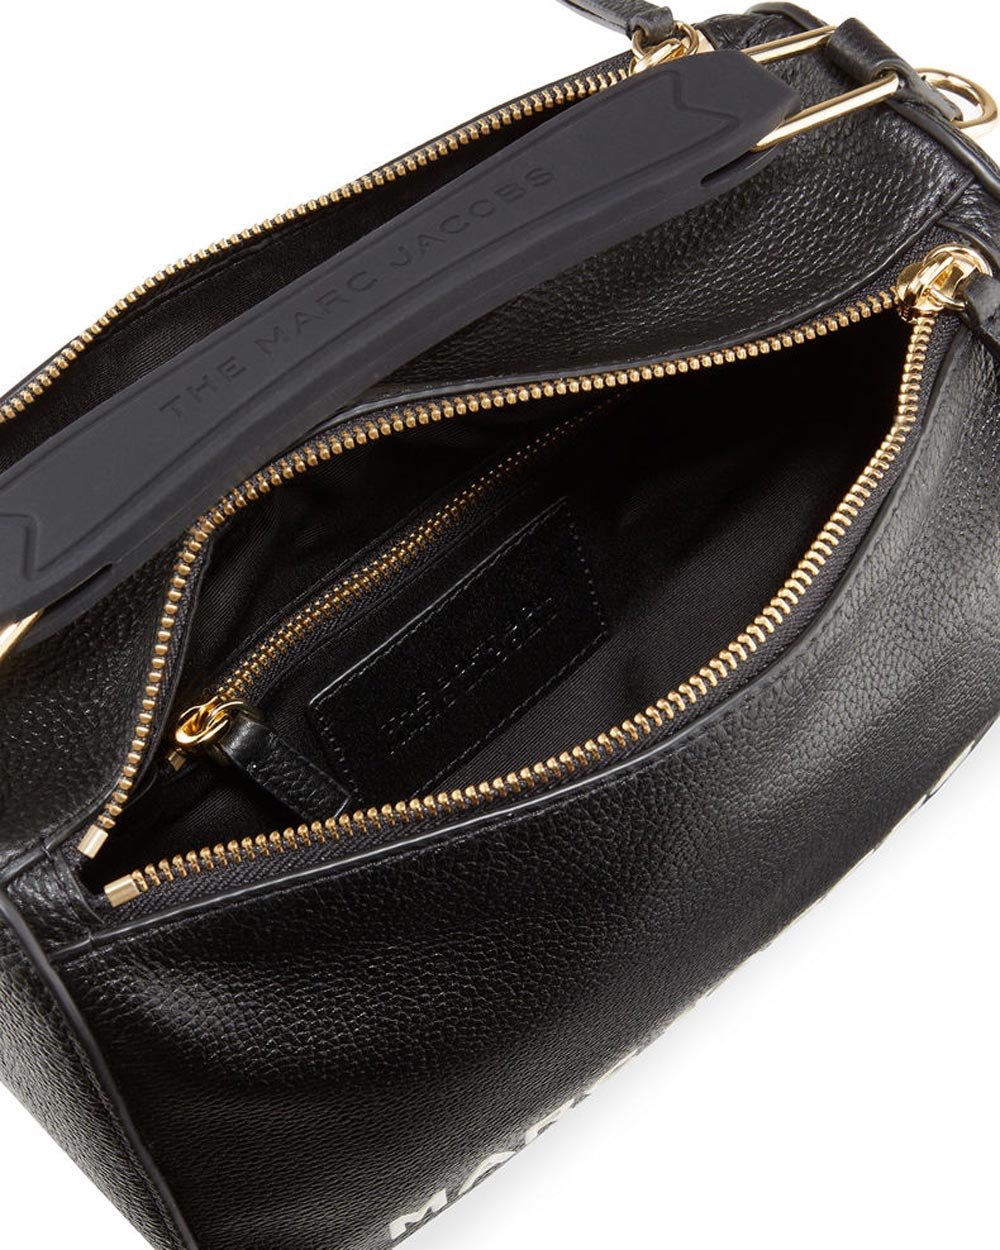 The Soft Box Crossbody in Black Leather